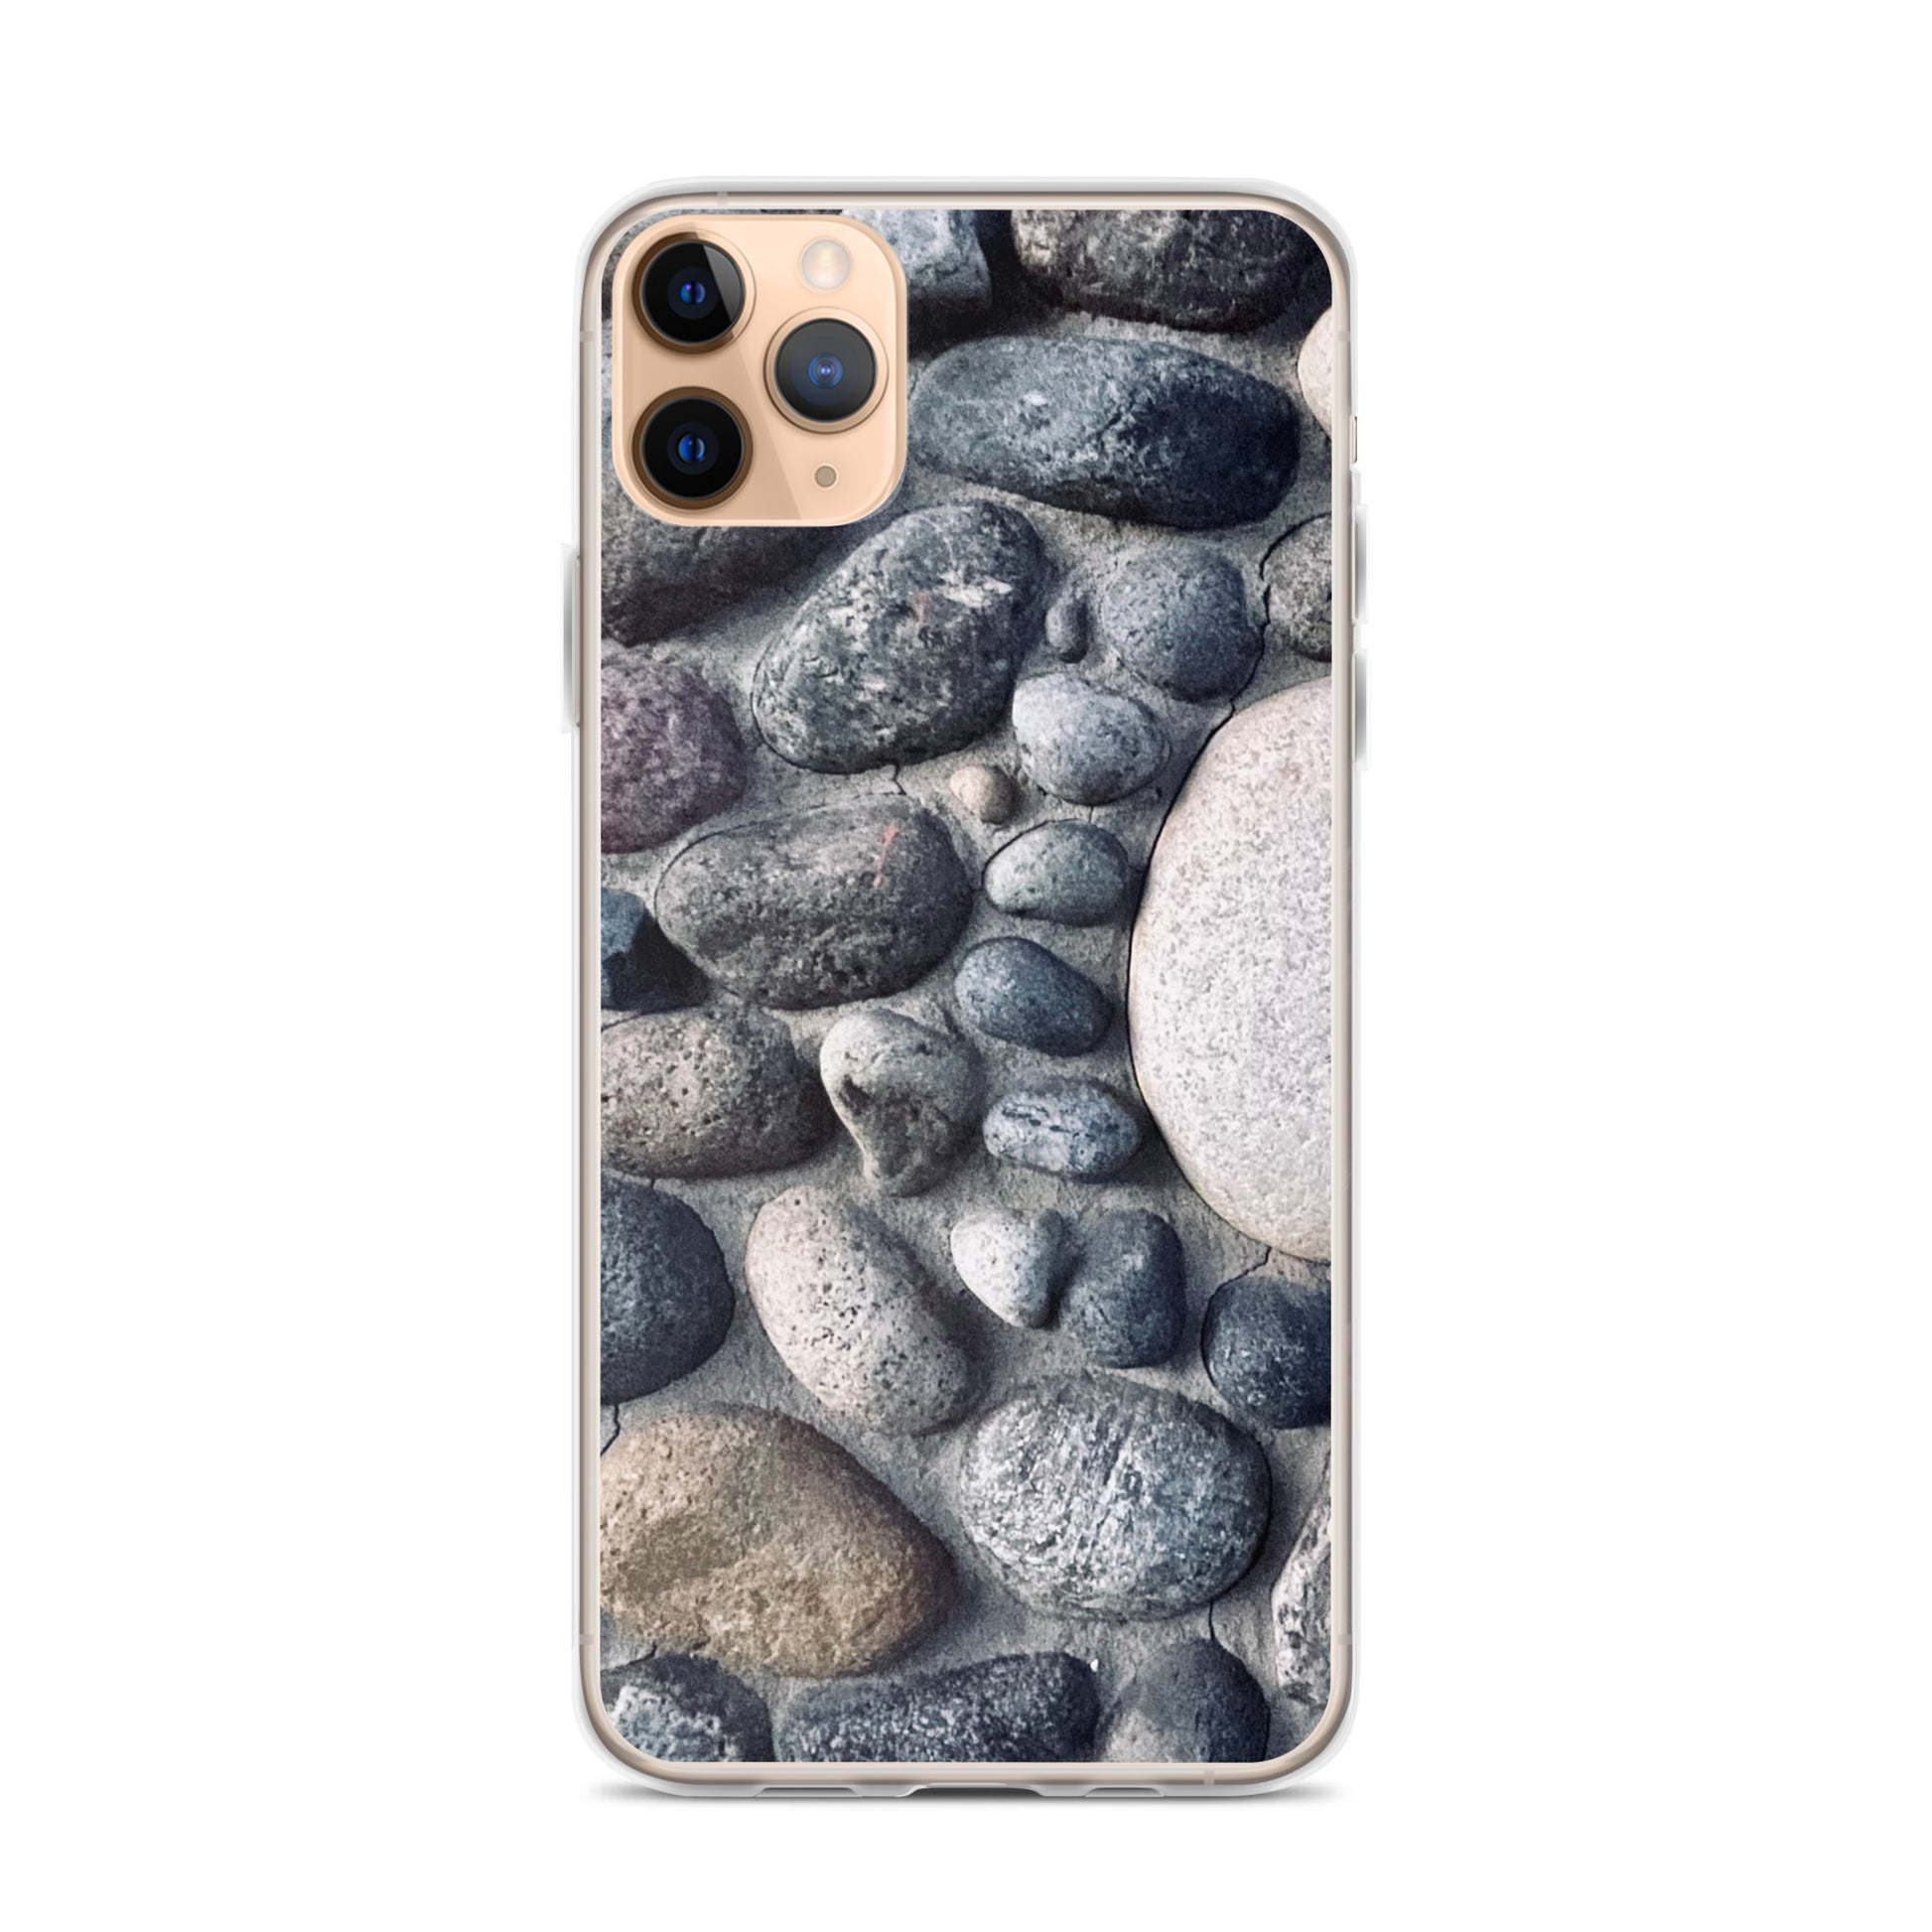 Rock n Rocks n More Rocks (iPhone Case) - Comfortable Culture - iPhone 11 Pro Max - Mobile Phone Cases - Comfortable Culture